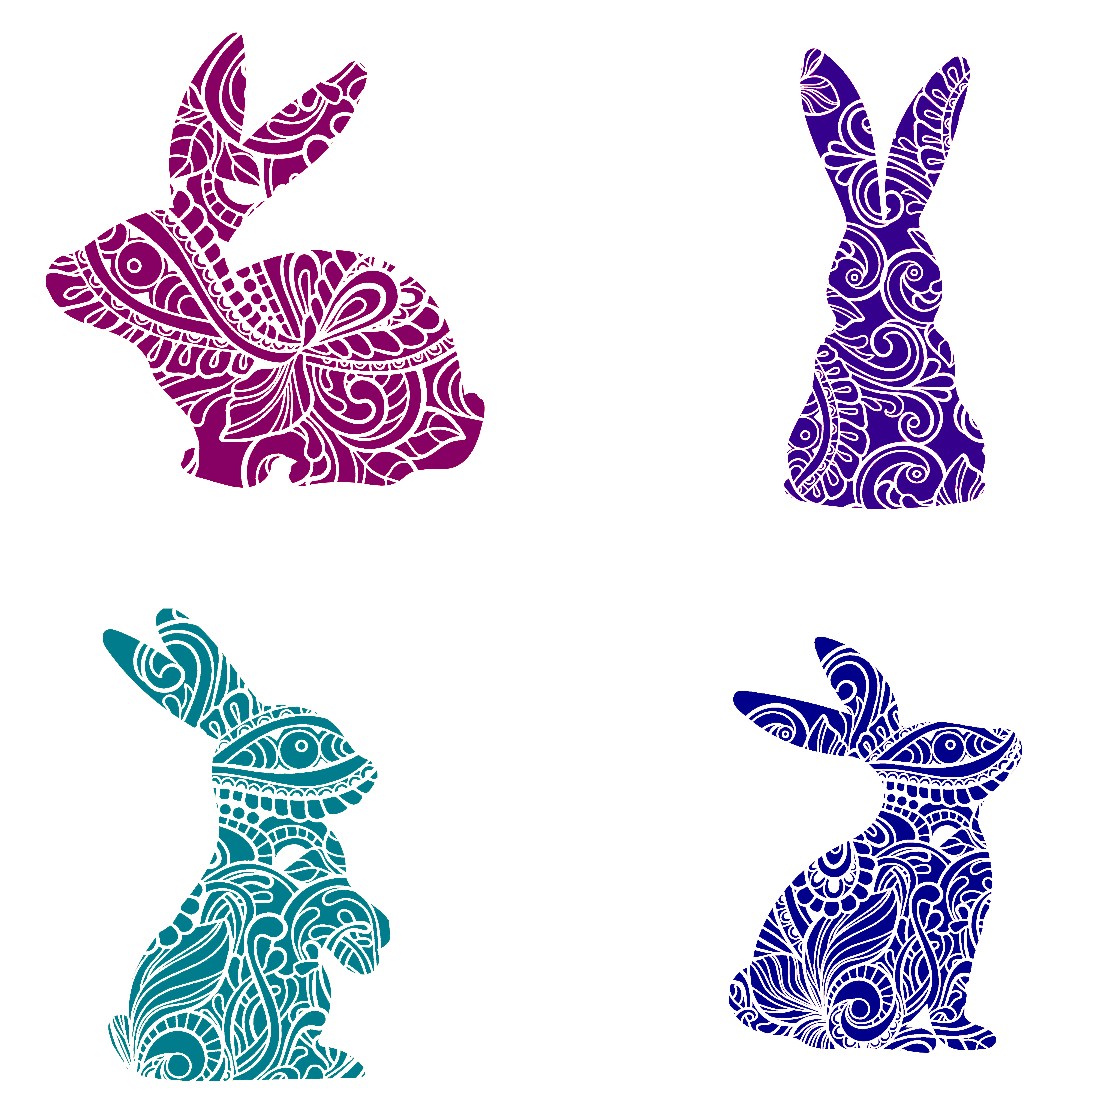 Decorative Bunny Set of 6 Stickers Muliti Colored Colorful Rabbit Animal SVG Files preview image.